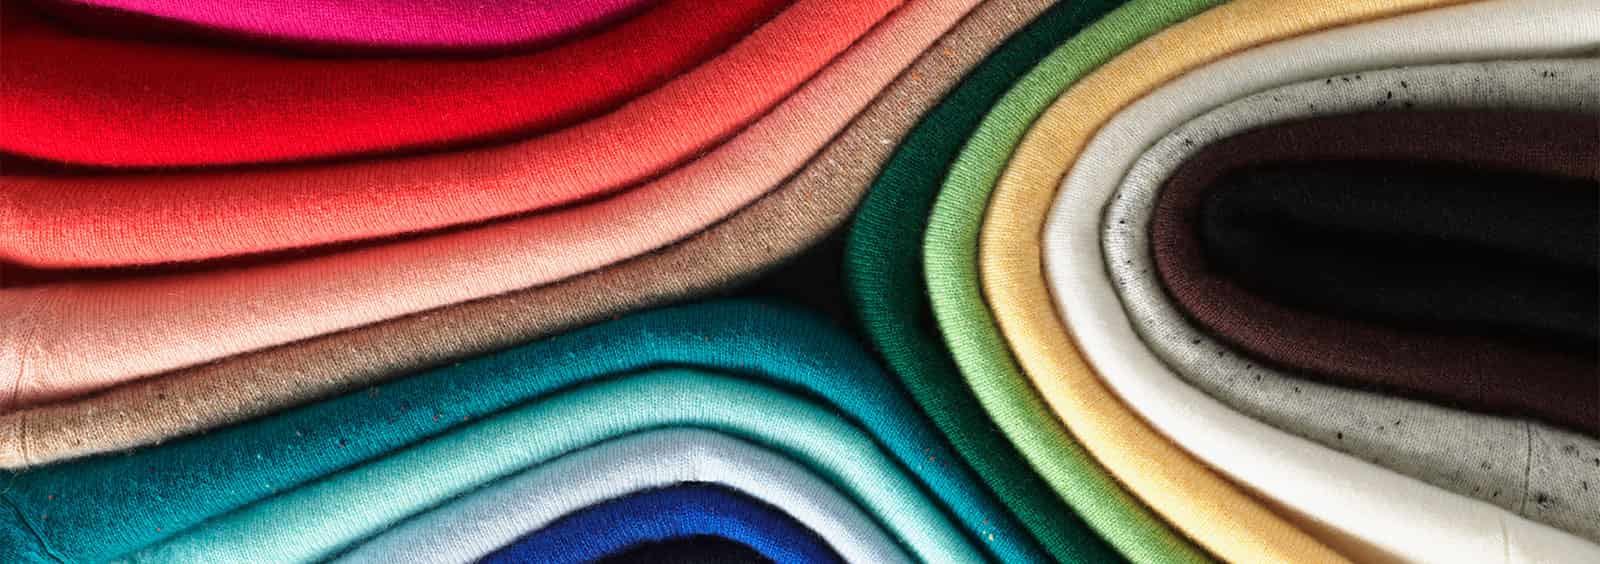 Cashmere Sweaters for Your Grandma